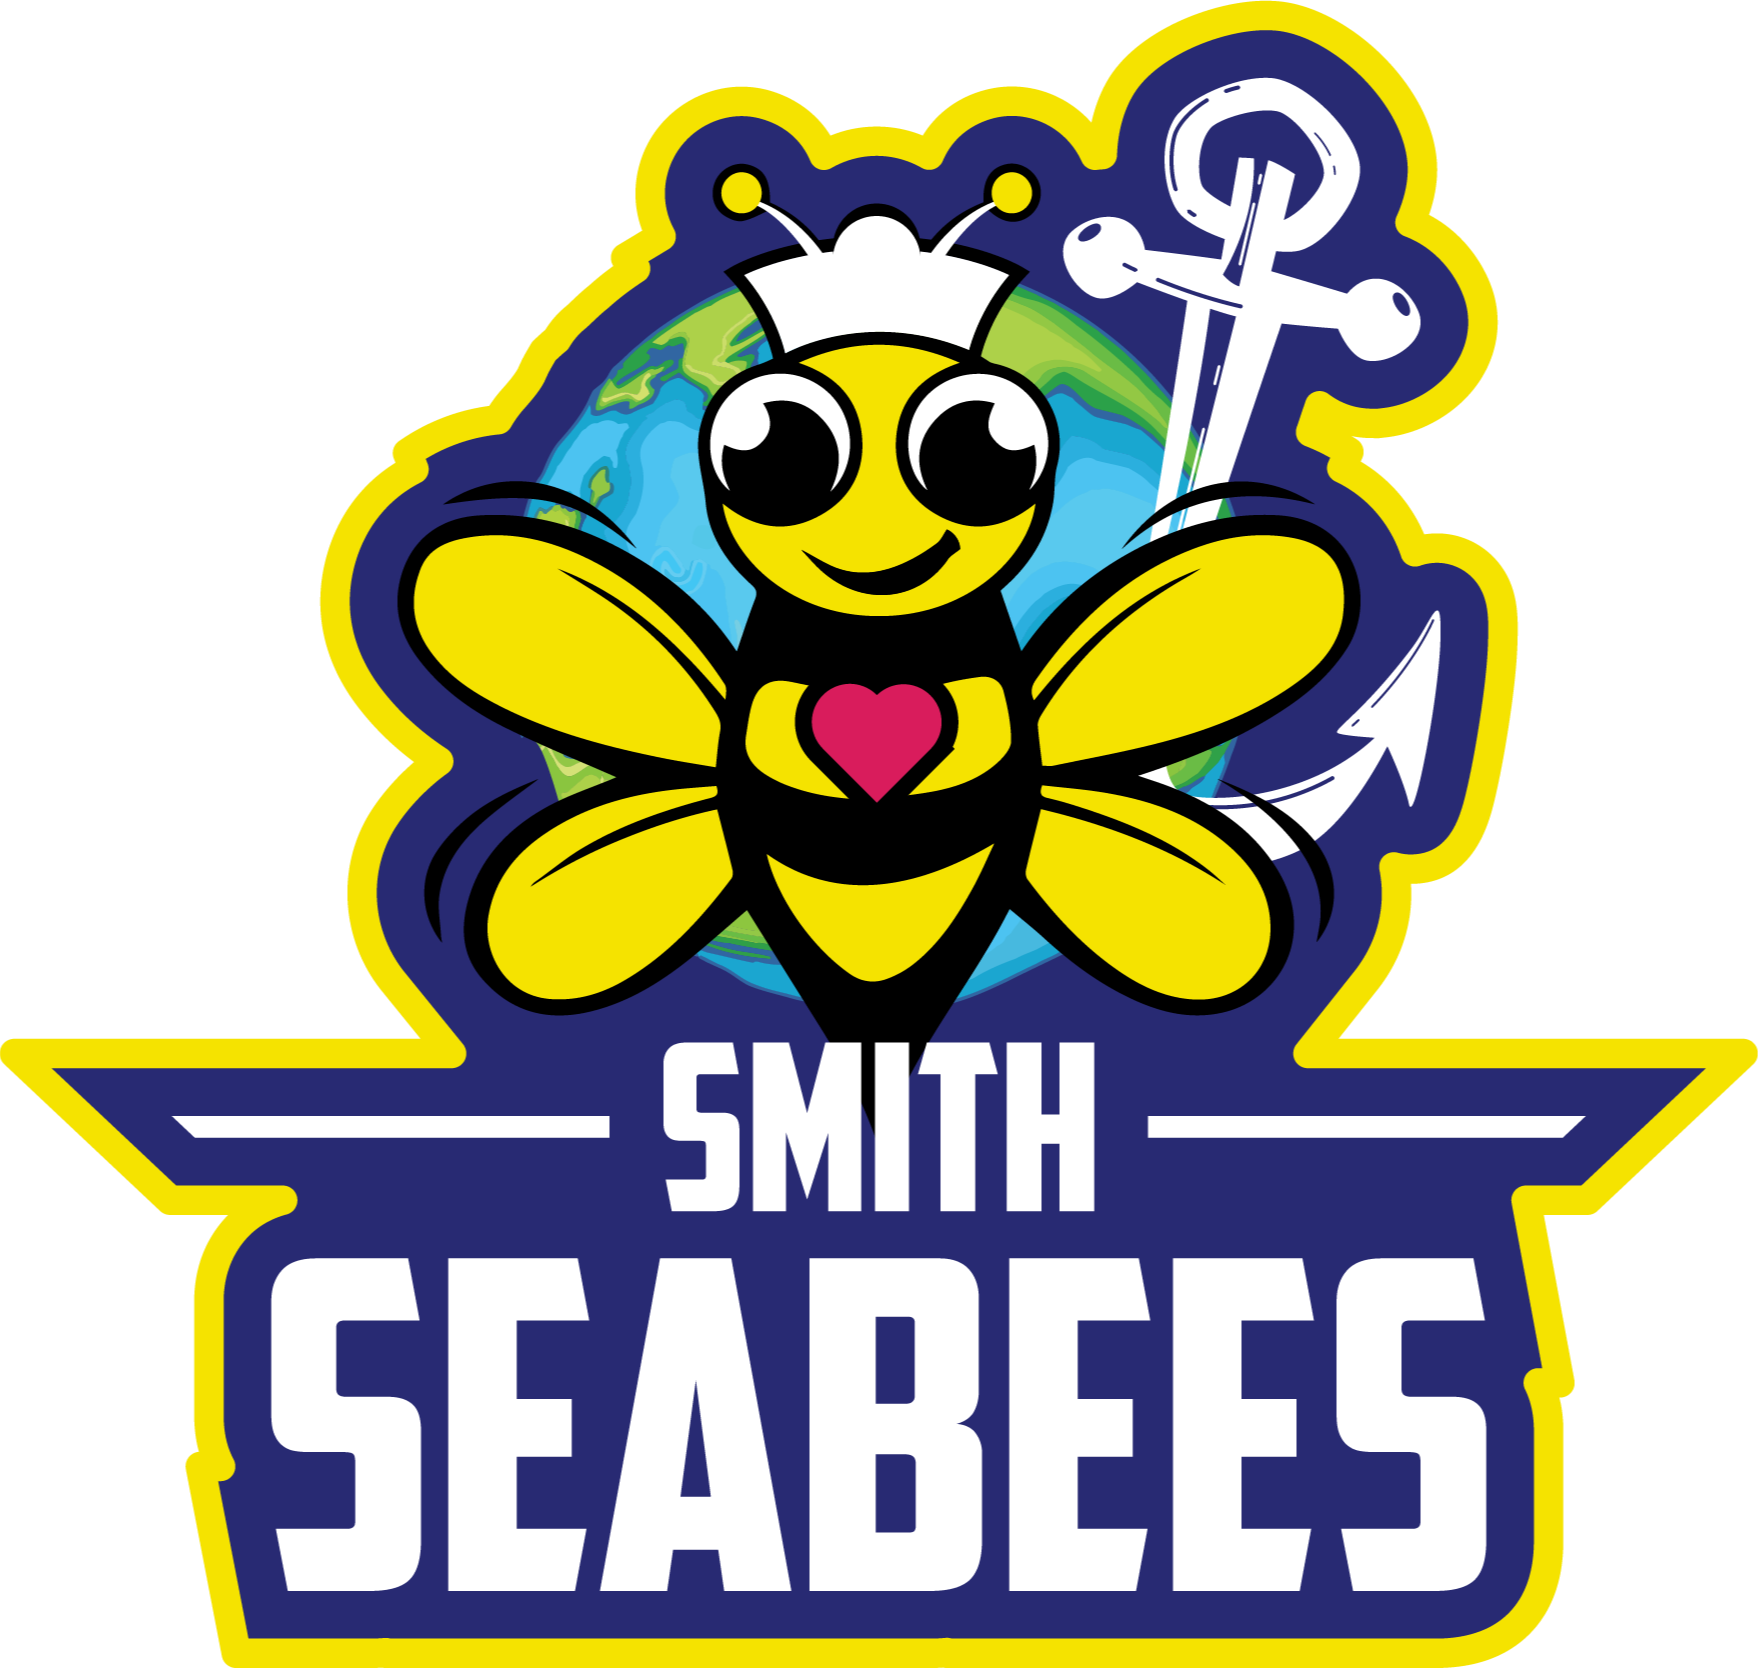 Smith Elementary logo with the "Seabees" bee mascot and a globe in the background